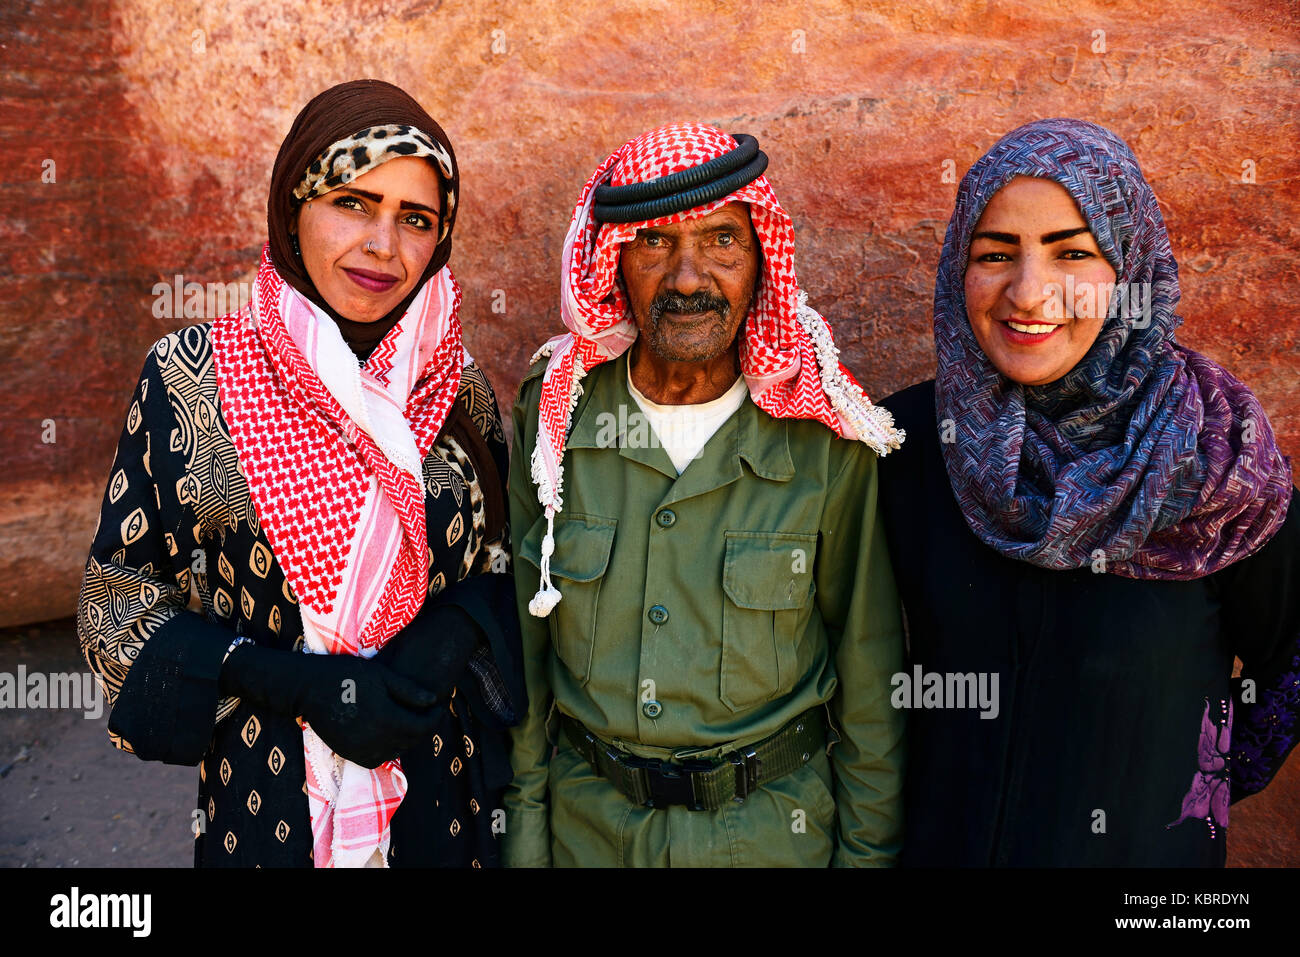 Jordanian Bedouin Cloth High Resolution Stock Photography and Images - Alamy